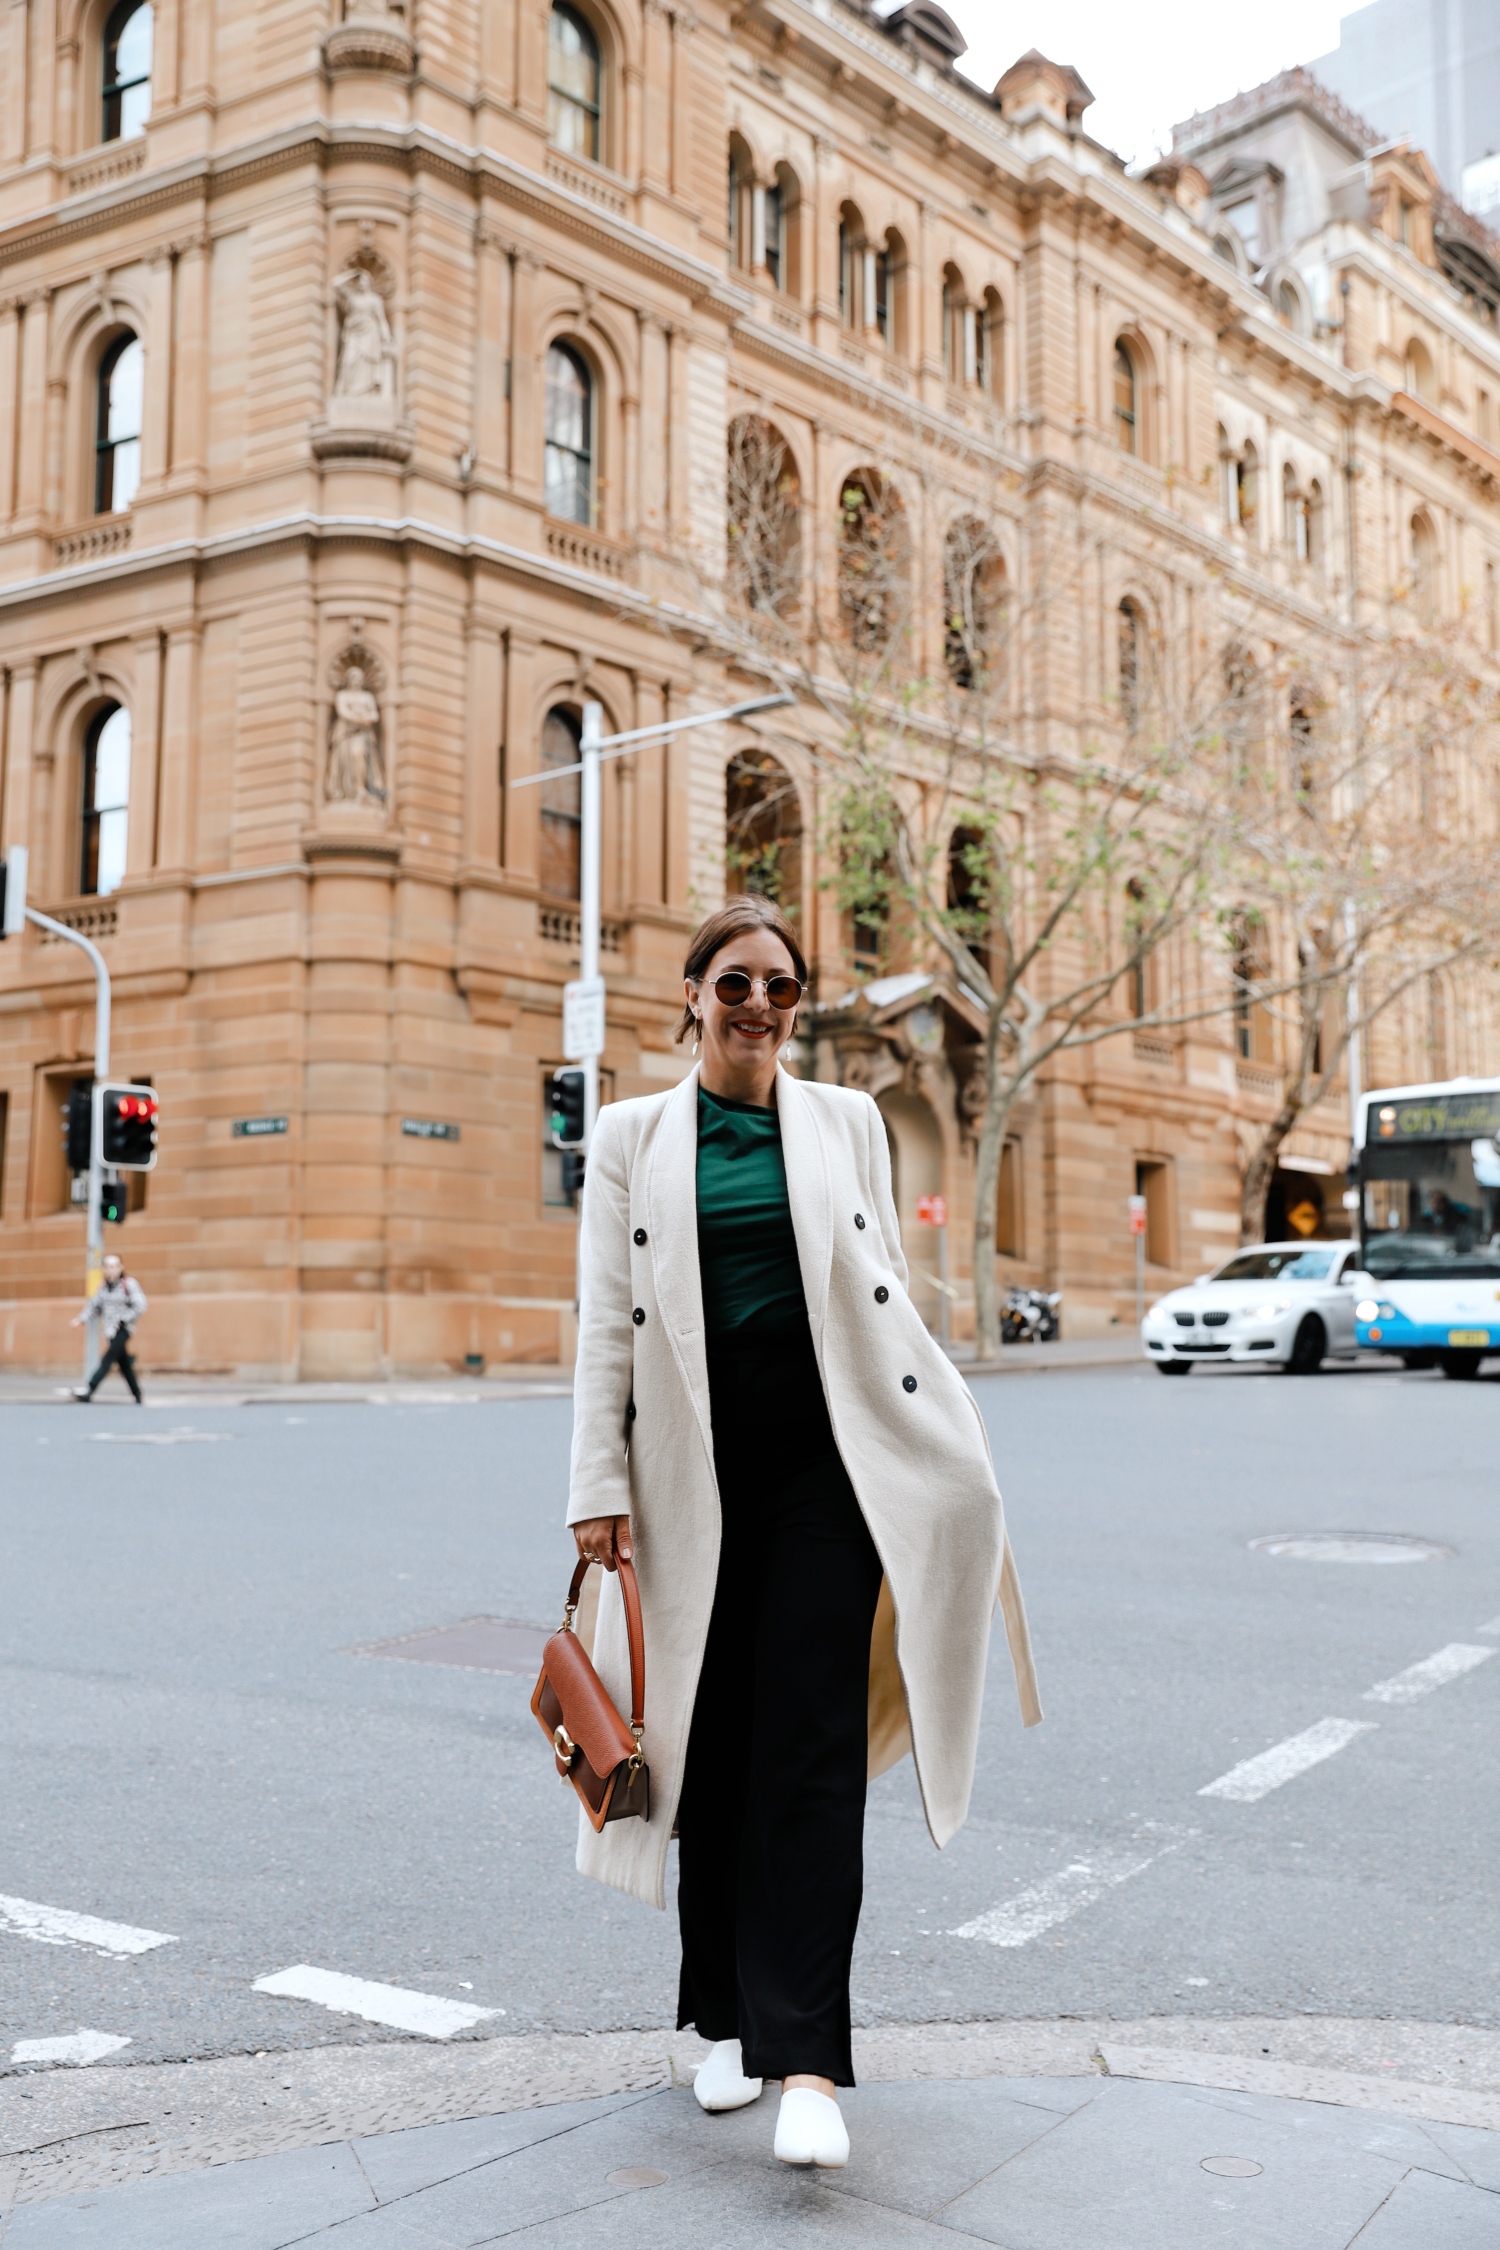 SHEIN MOTF Collection Review - Australia - Leather and Lattes